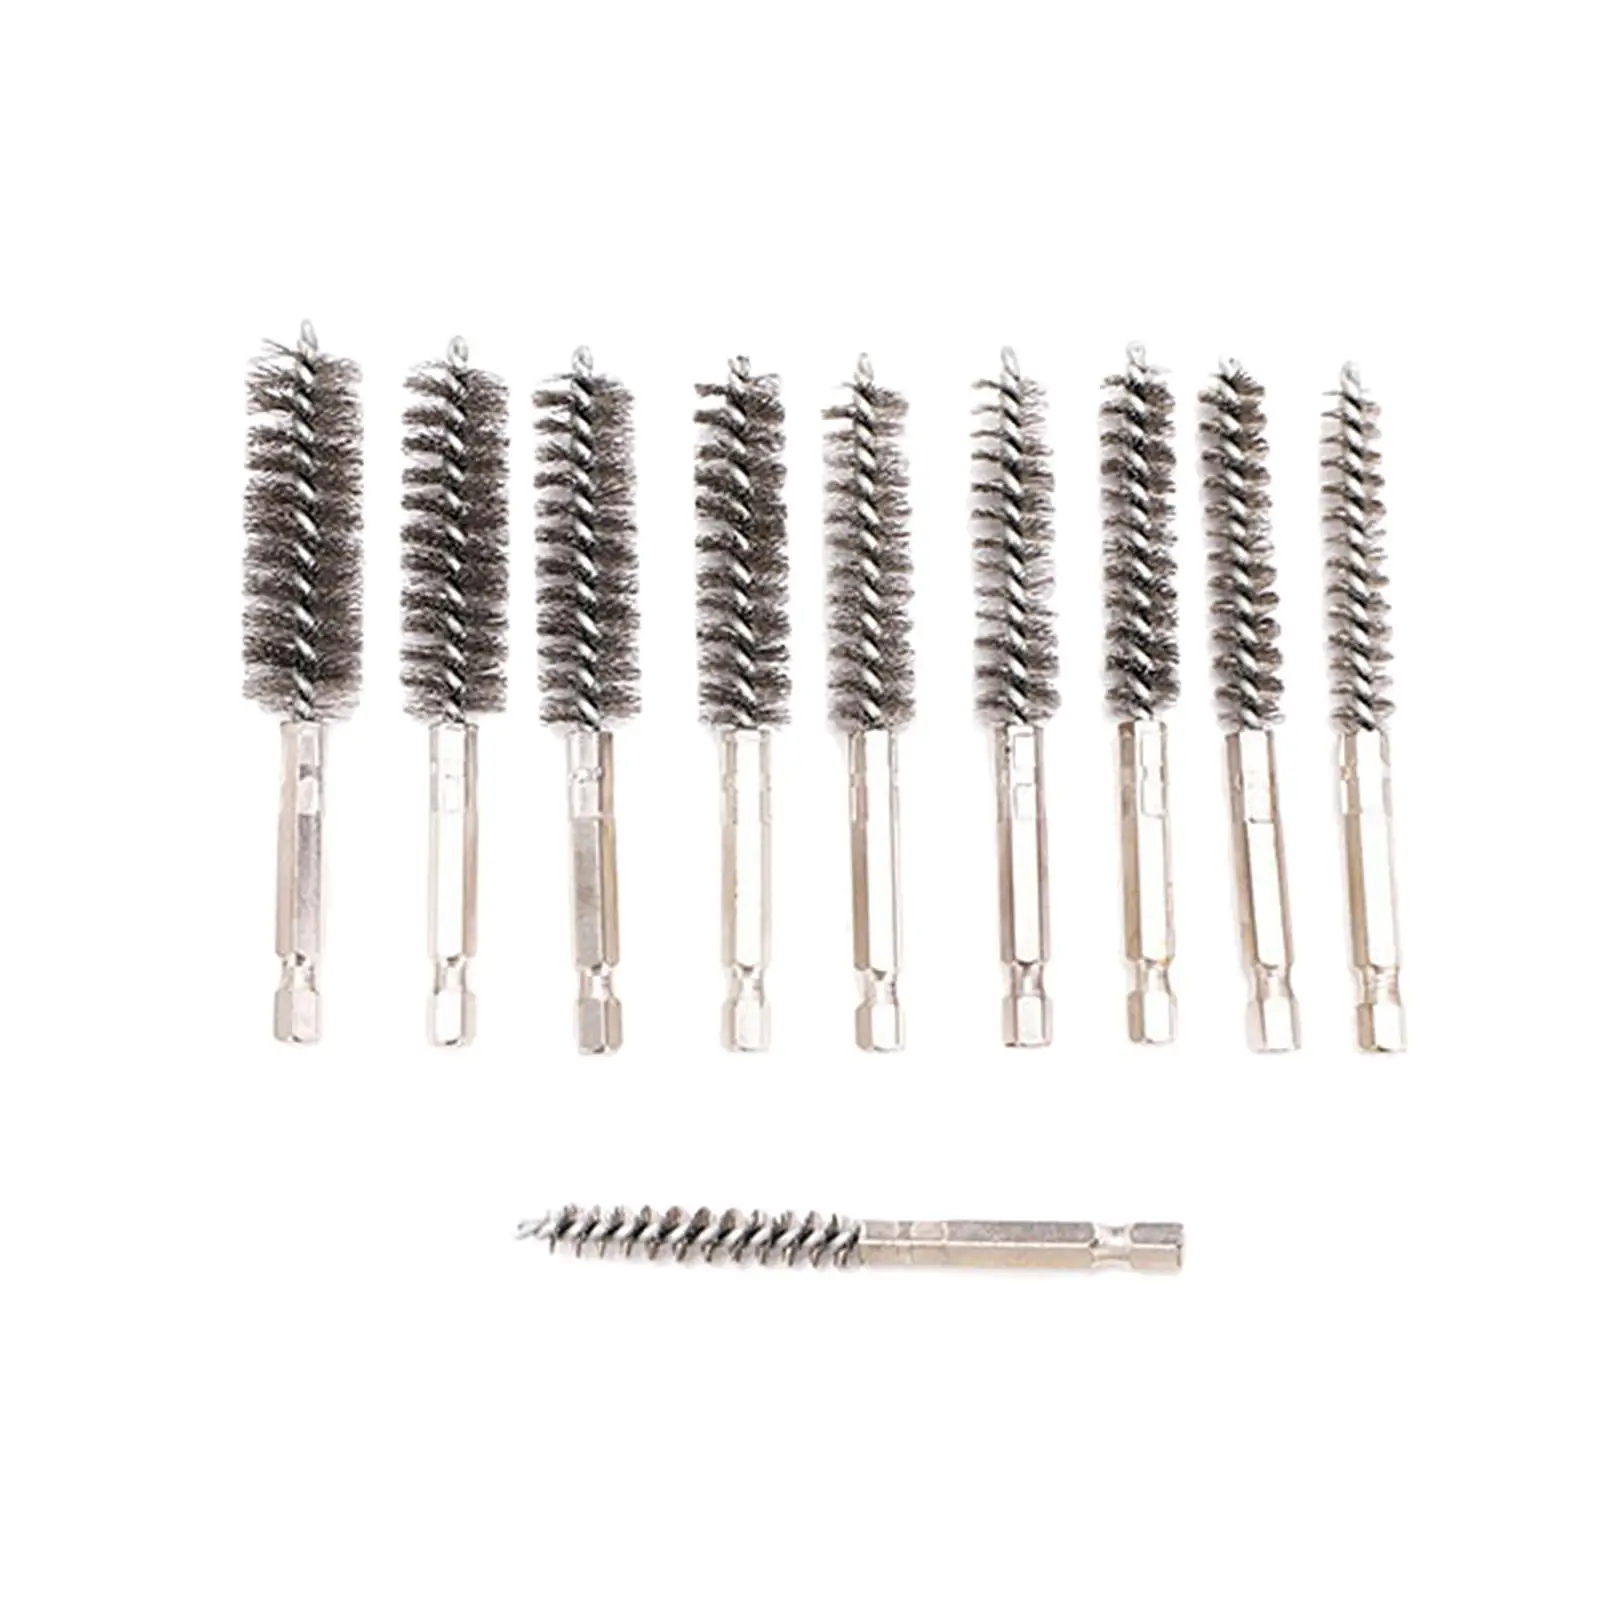 10Pcs Wire Brush Hex Drill Bit Stainless Steel Cleaning Brush for Machining Power Drill Cylinders Cleaning Electric Drill Impact